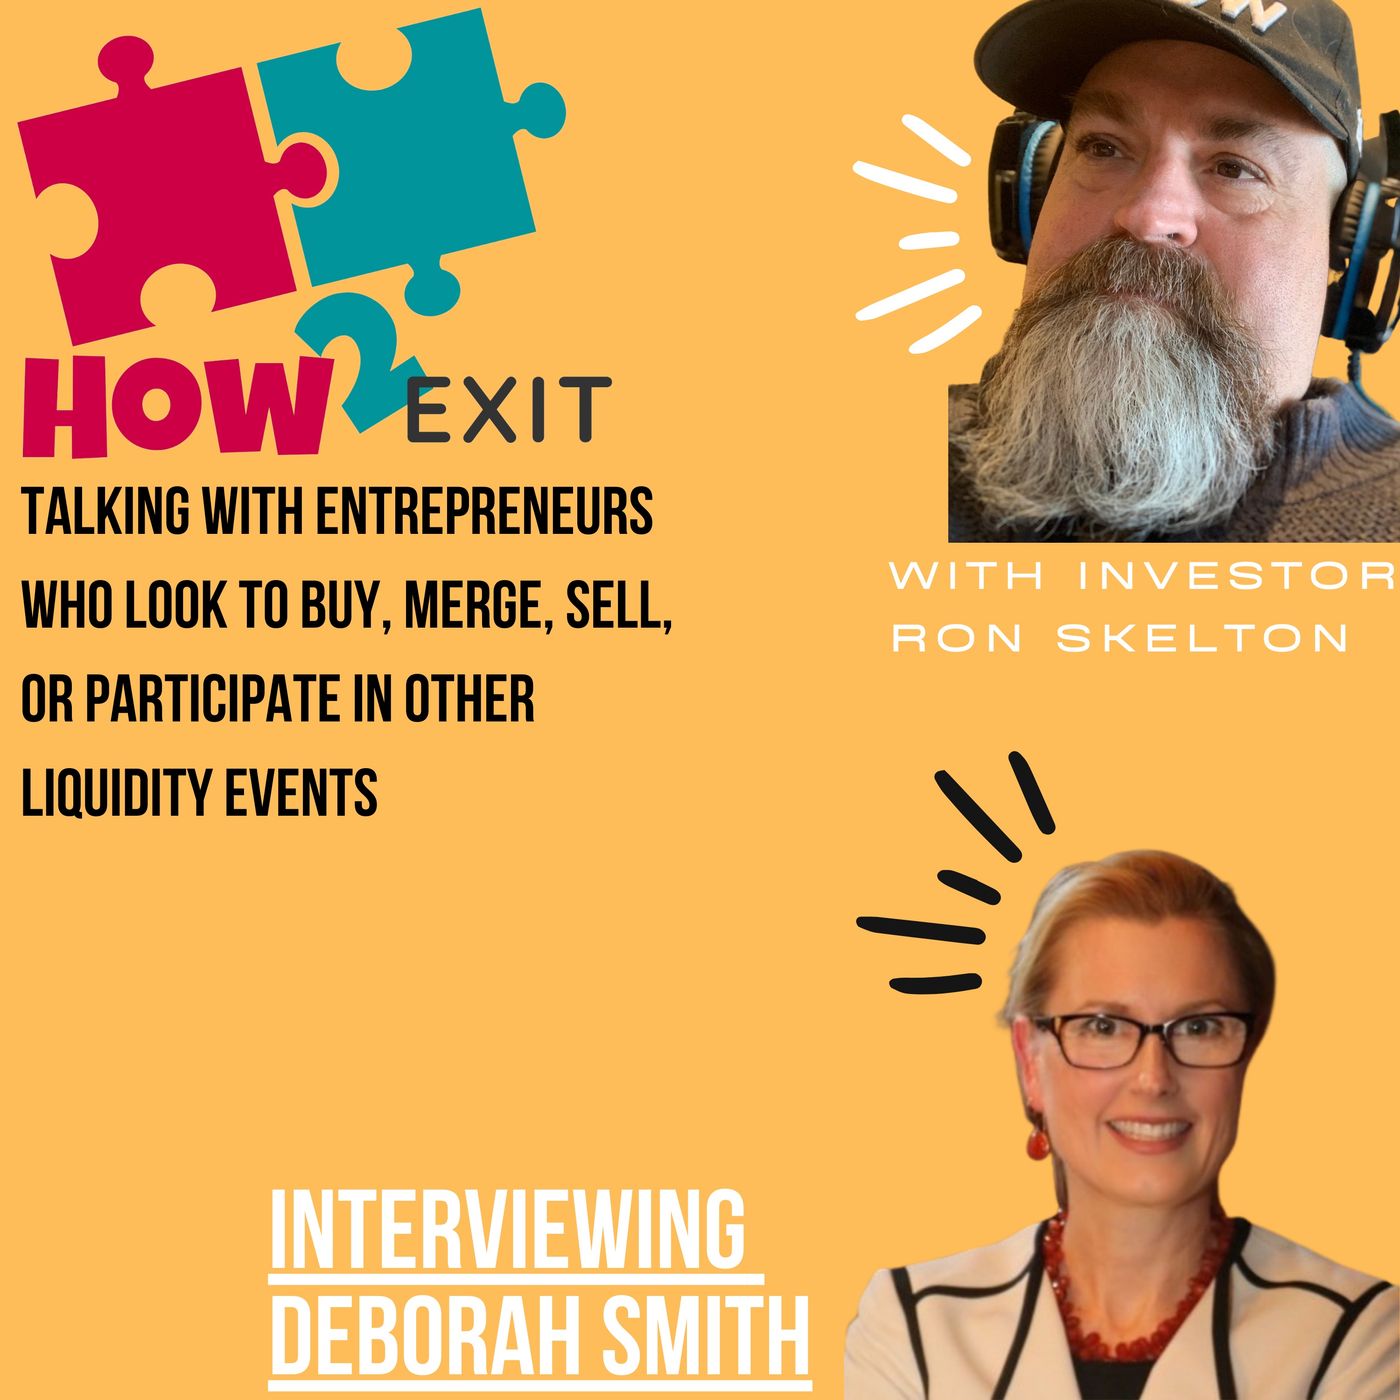 How2Exit Episode 34: Deborah Smith - Co-Founder and CEO of The CenterCap Group, LLC. Image